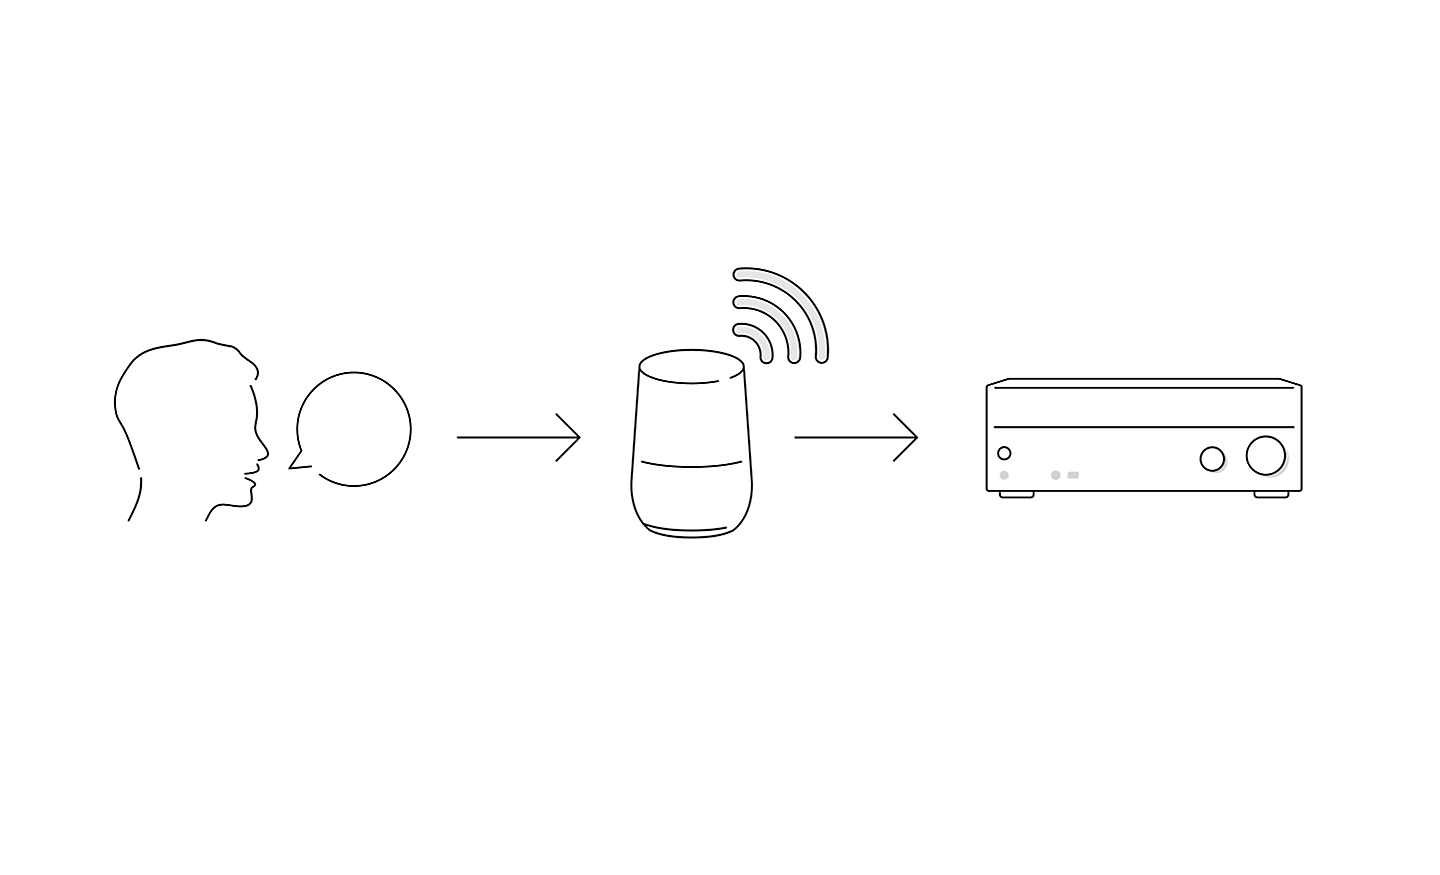 Outline image of a head with a speech bubble an arrow to a smart speaker and another arrow to an AV receiver